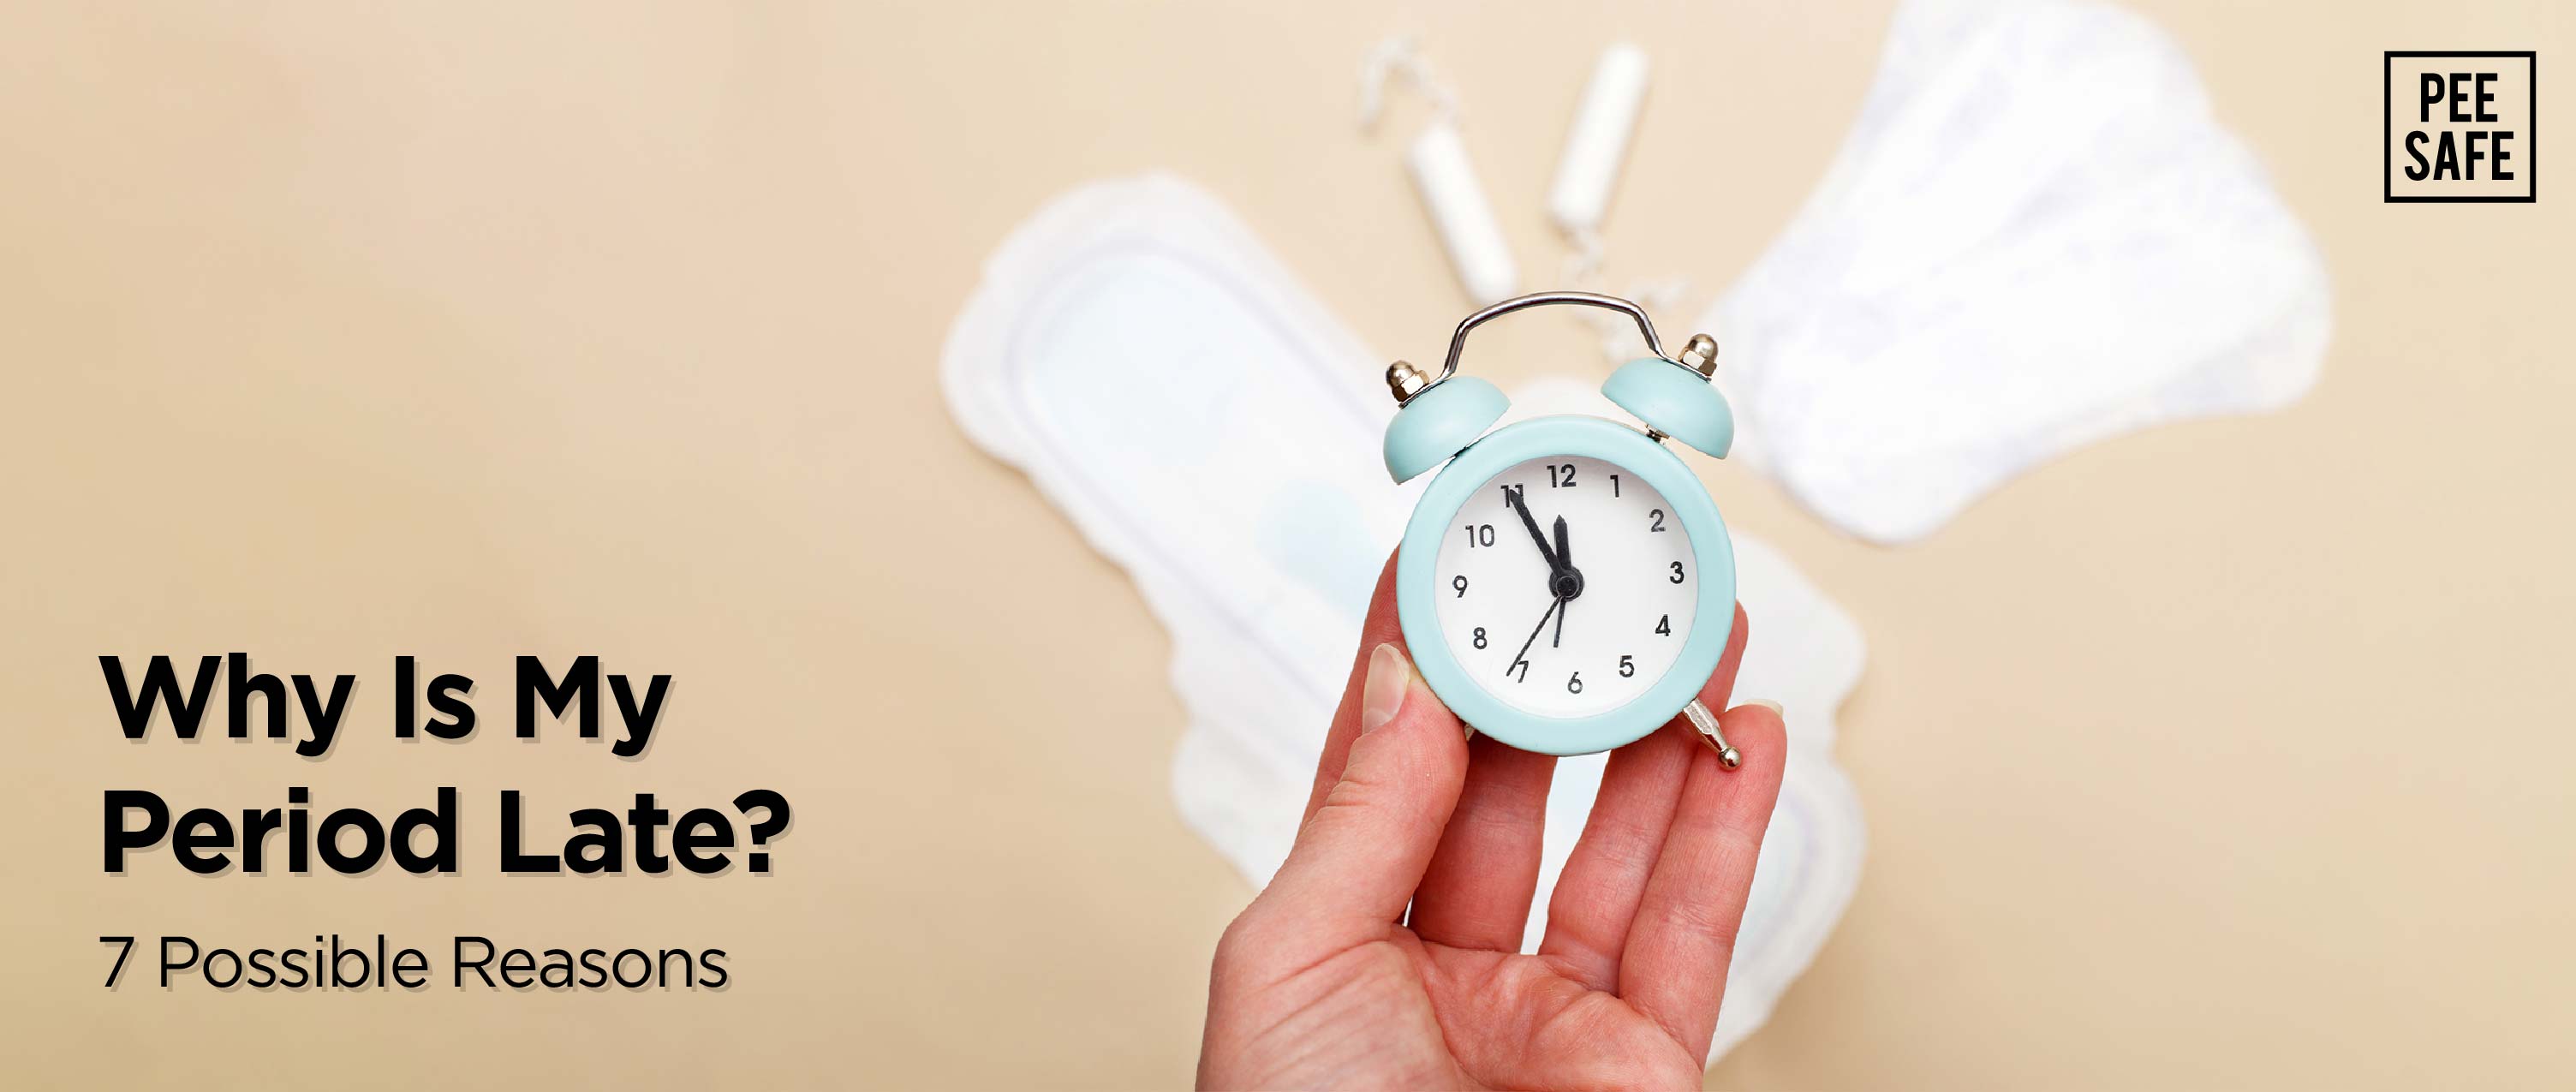 Why Is My Period Late? 7 Possible Reasons